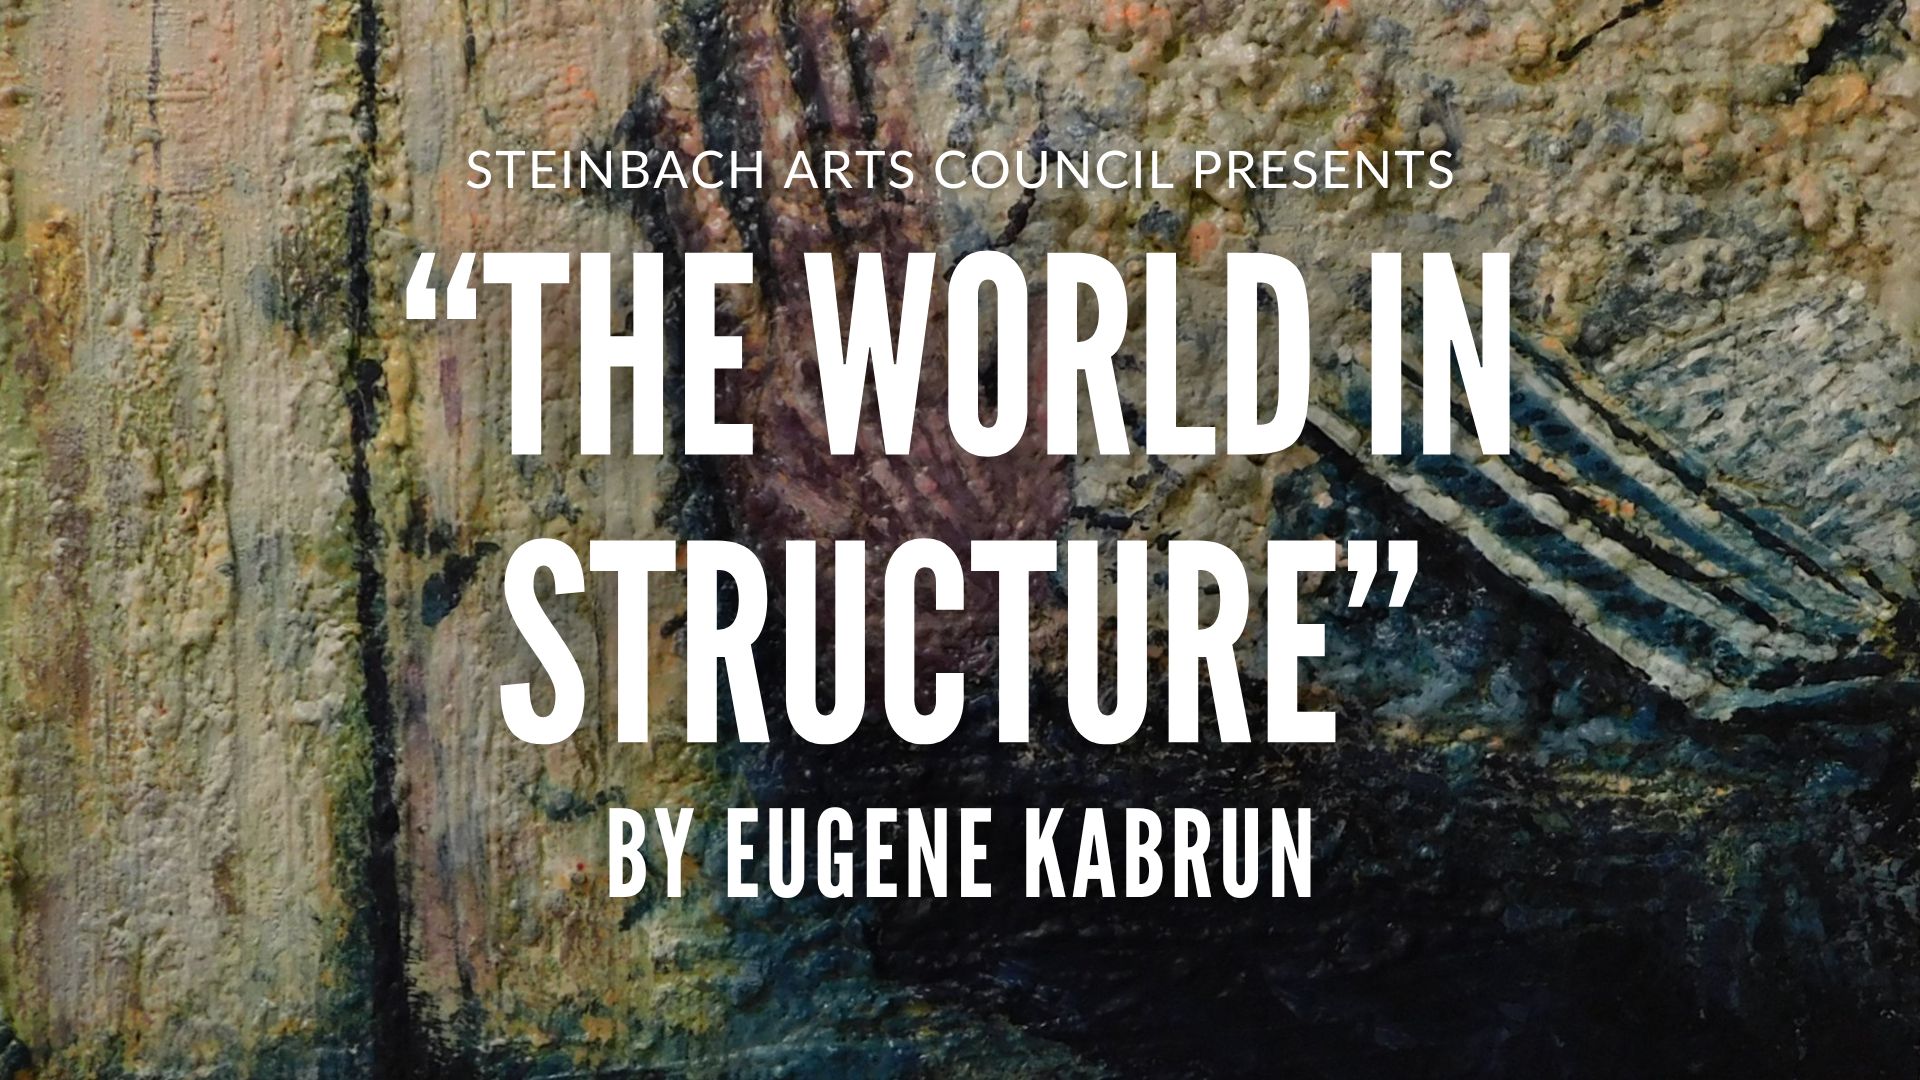 Eugene Kabrun to Exhibit at the Steinbach Cultural Arts Centre